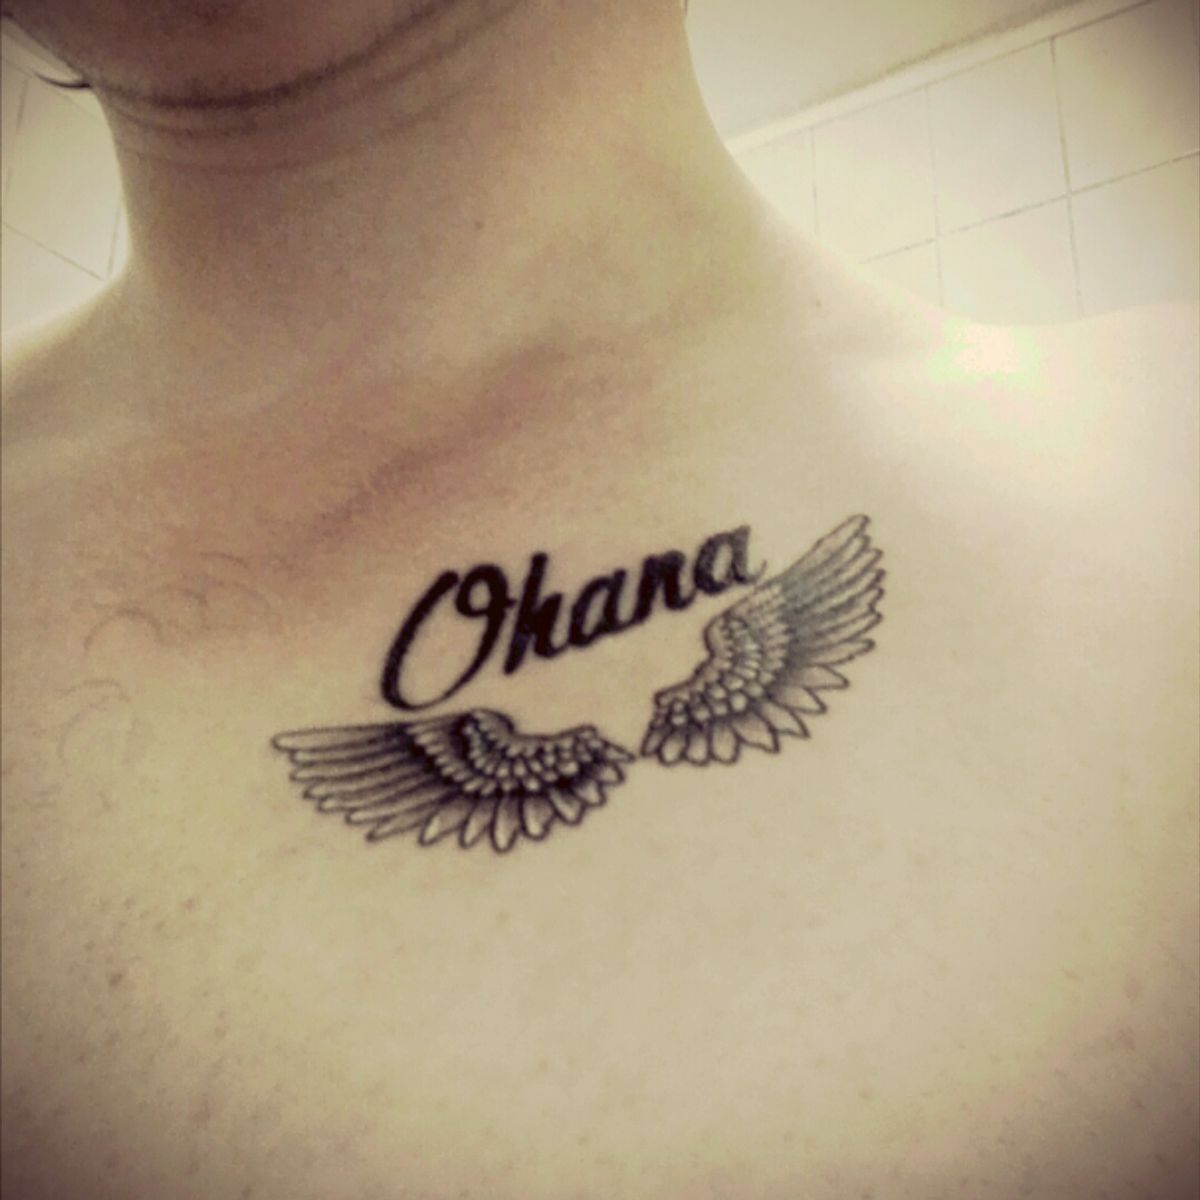 Tattoo uploaded by Nick De Kee • My Ohana tattoo. With angel wings to honor  my fallen brothers. #ohanatattoo #ohana #angelwings #ohanameansfamily  #family • Tattoodo